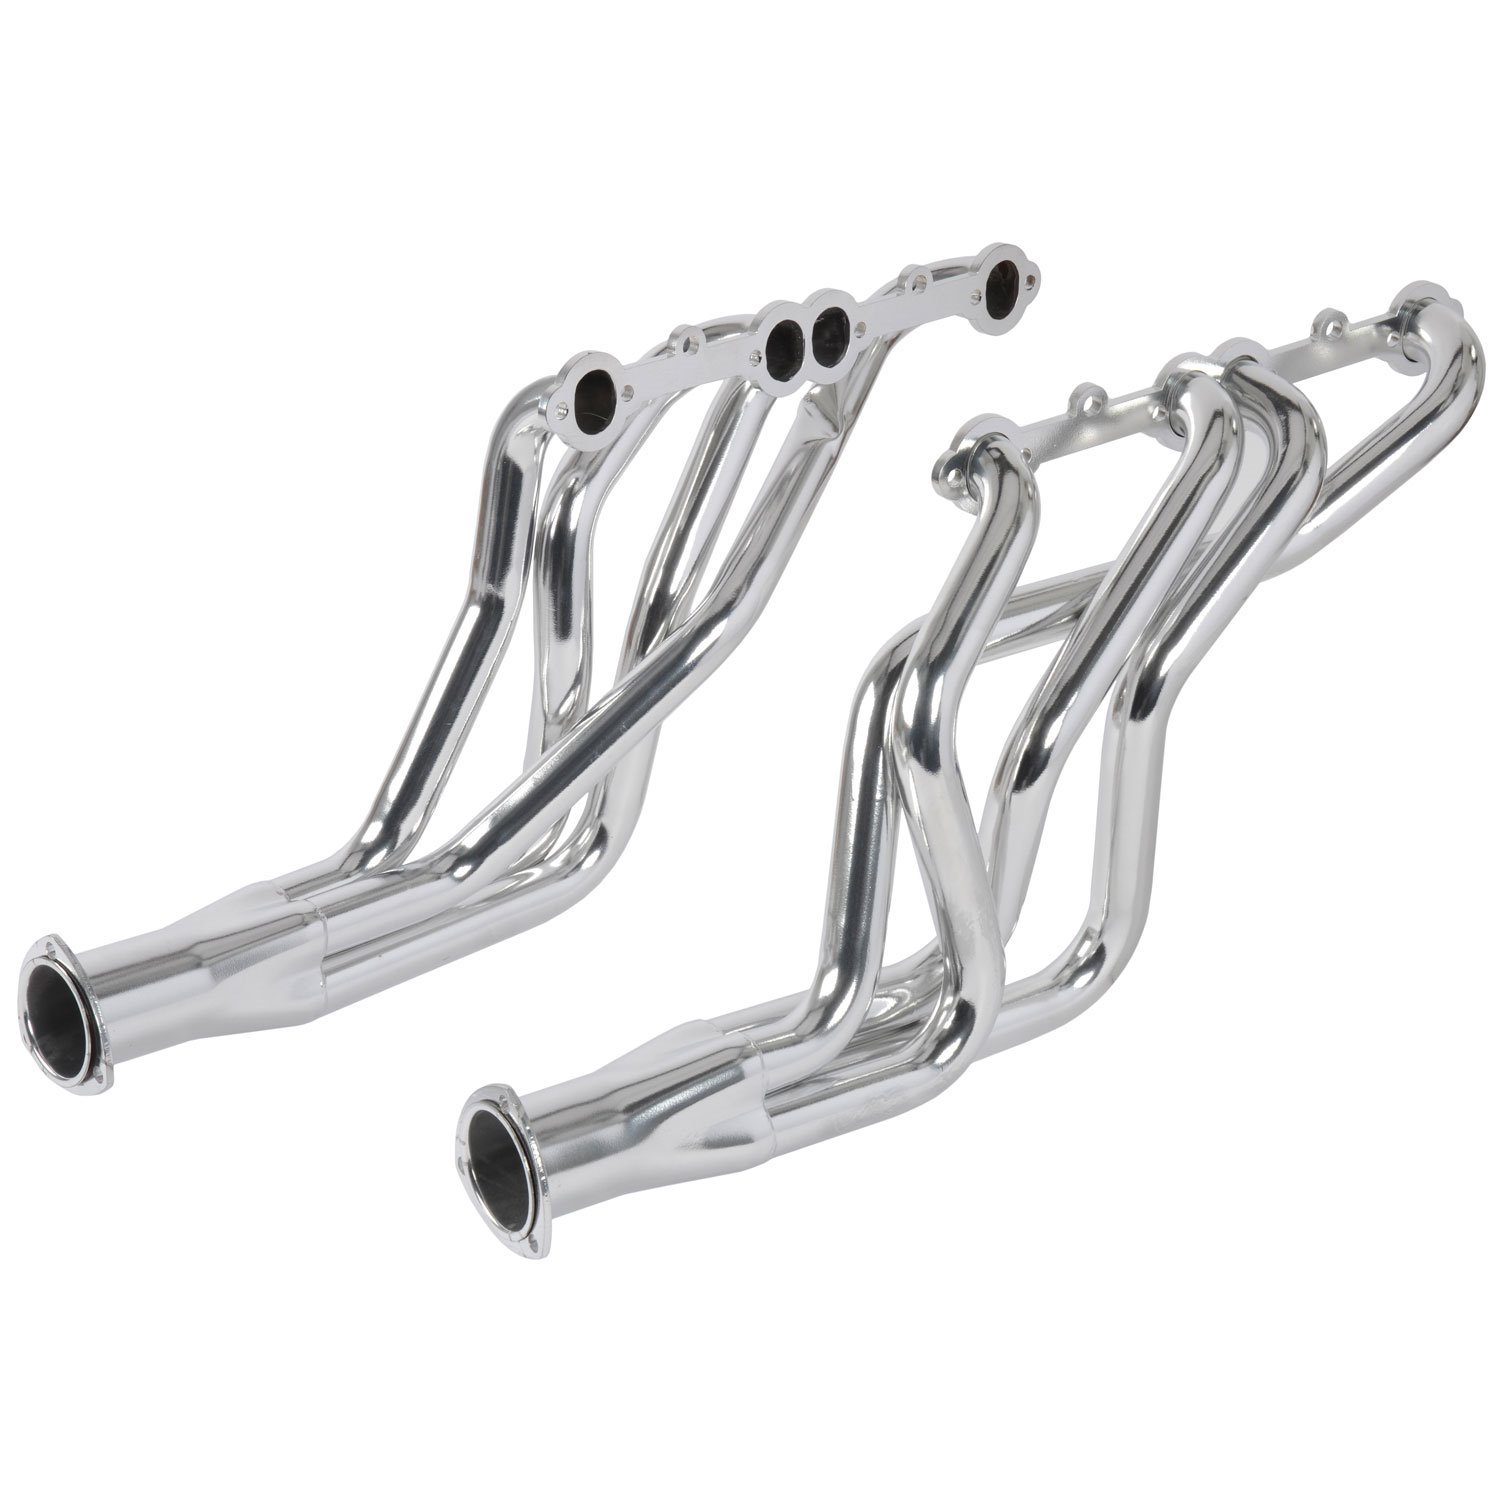 Ceramic Coated Long Tube Headers for Small Block Chevy 265-400